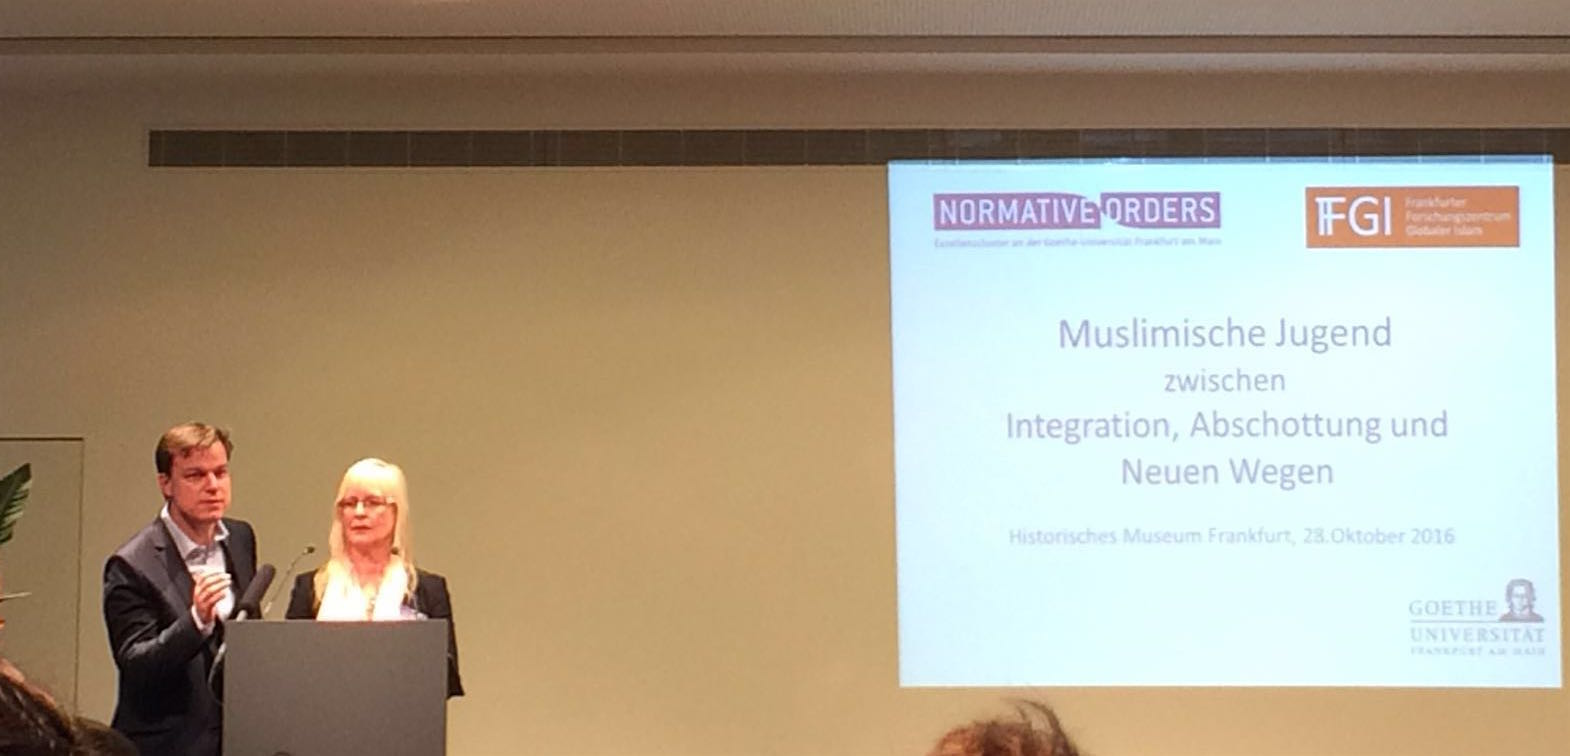 The conference was organised by Frankfurt Research Centre for Global Islam at the Excellence Cluster "Normative Orders" at Goethe University under the auspices of the Hessian Ministry of Social Affairs and Integration in the Historical Museum in Frankfurt.